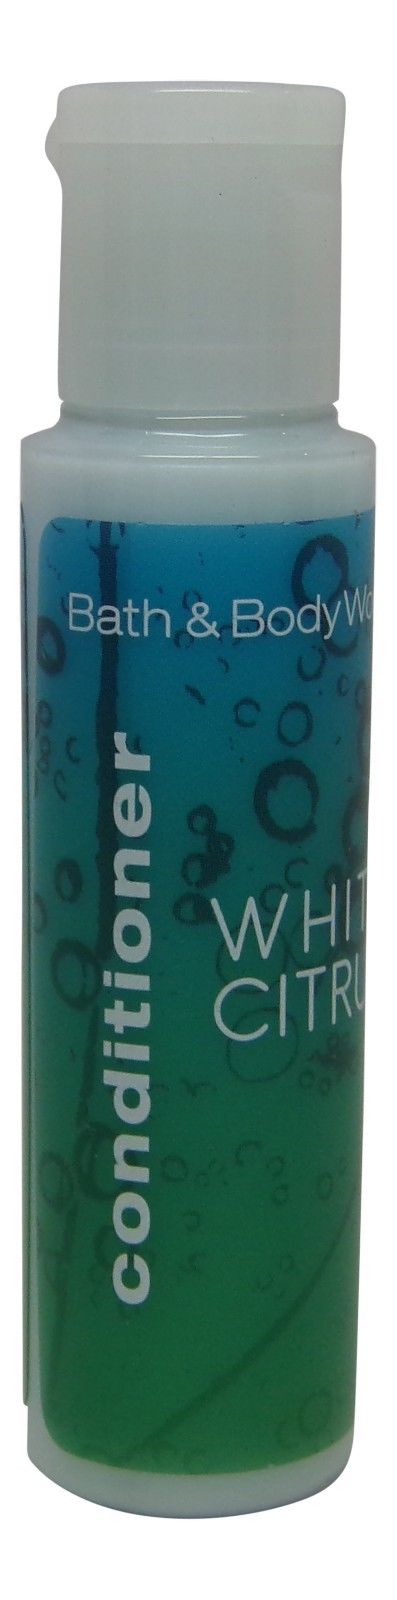 Bath and Body Works White Citrus Conditioner Lot of 6 Each 0.75oz Total of 4.5oz